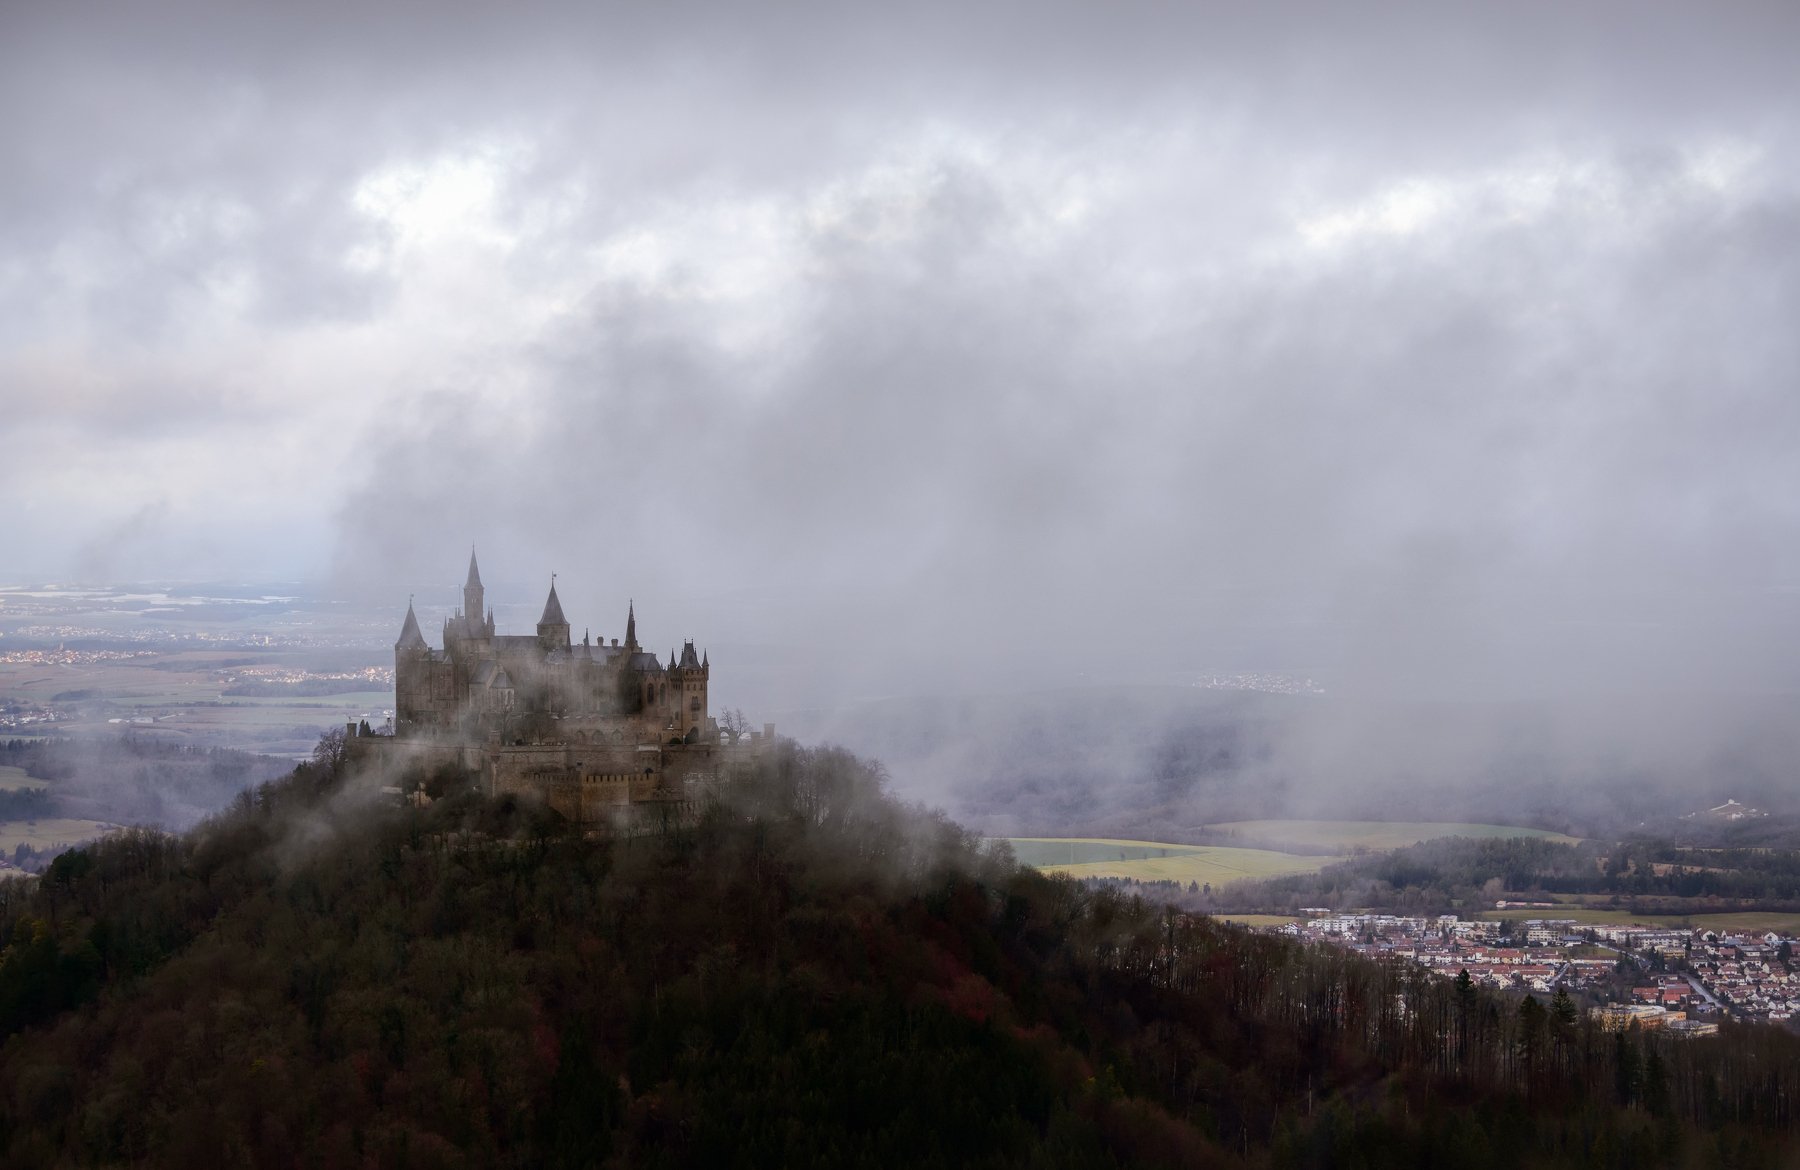 ancestral seat, building, Castle, century, dynastic, family, fortification, fortress, German Empire, Germany, historical, Hohenzollern Castle, imperial House of Hohenzollern, panoramic view, Prussian history, residence, royal, siege, throne, tourist desti, IvanKravtsov